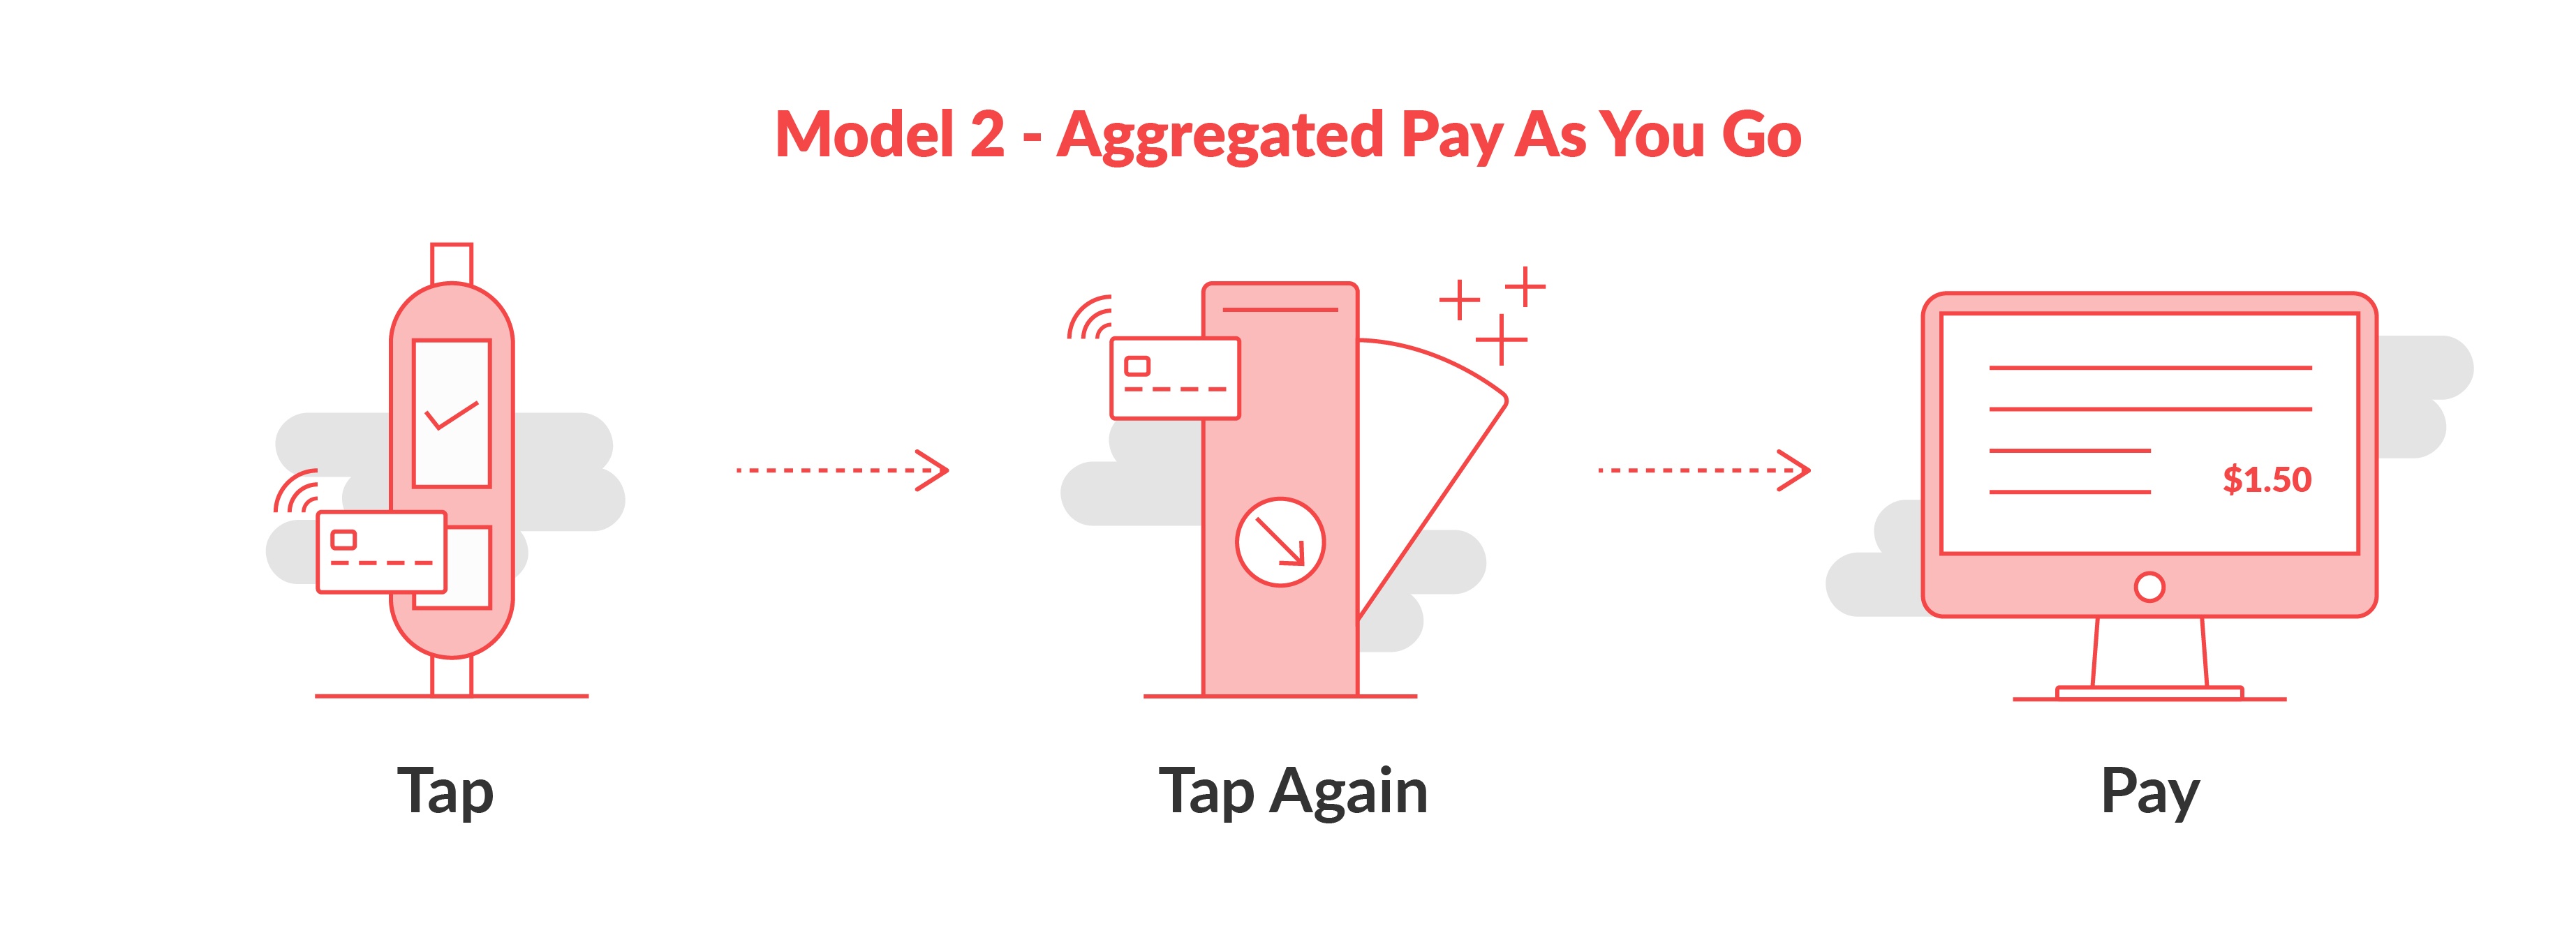 model-2-aggregated-pay-as-you-go-1.jpg